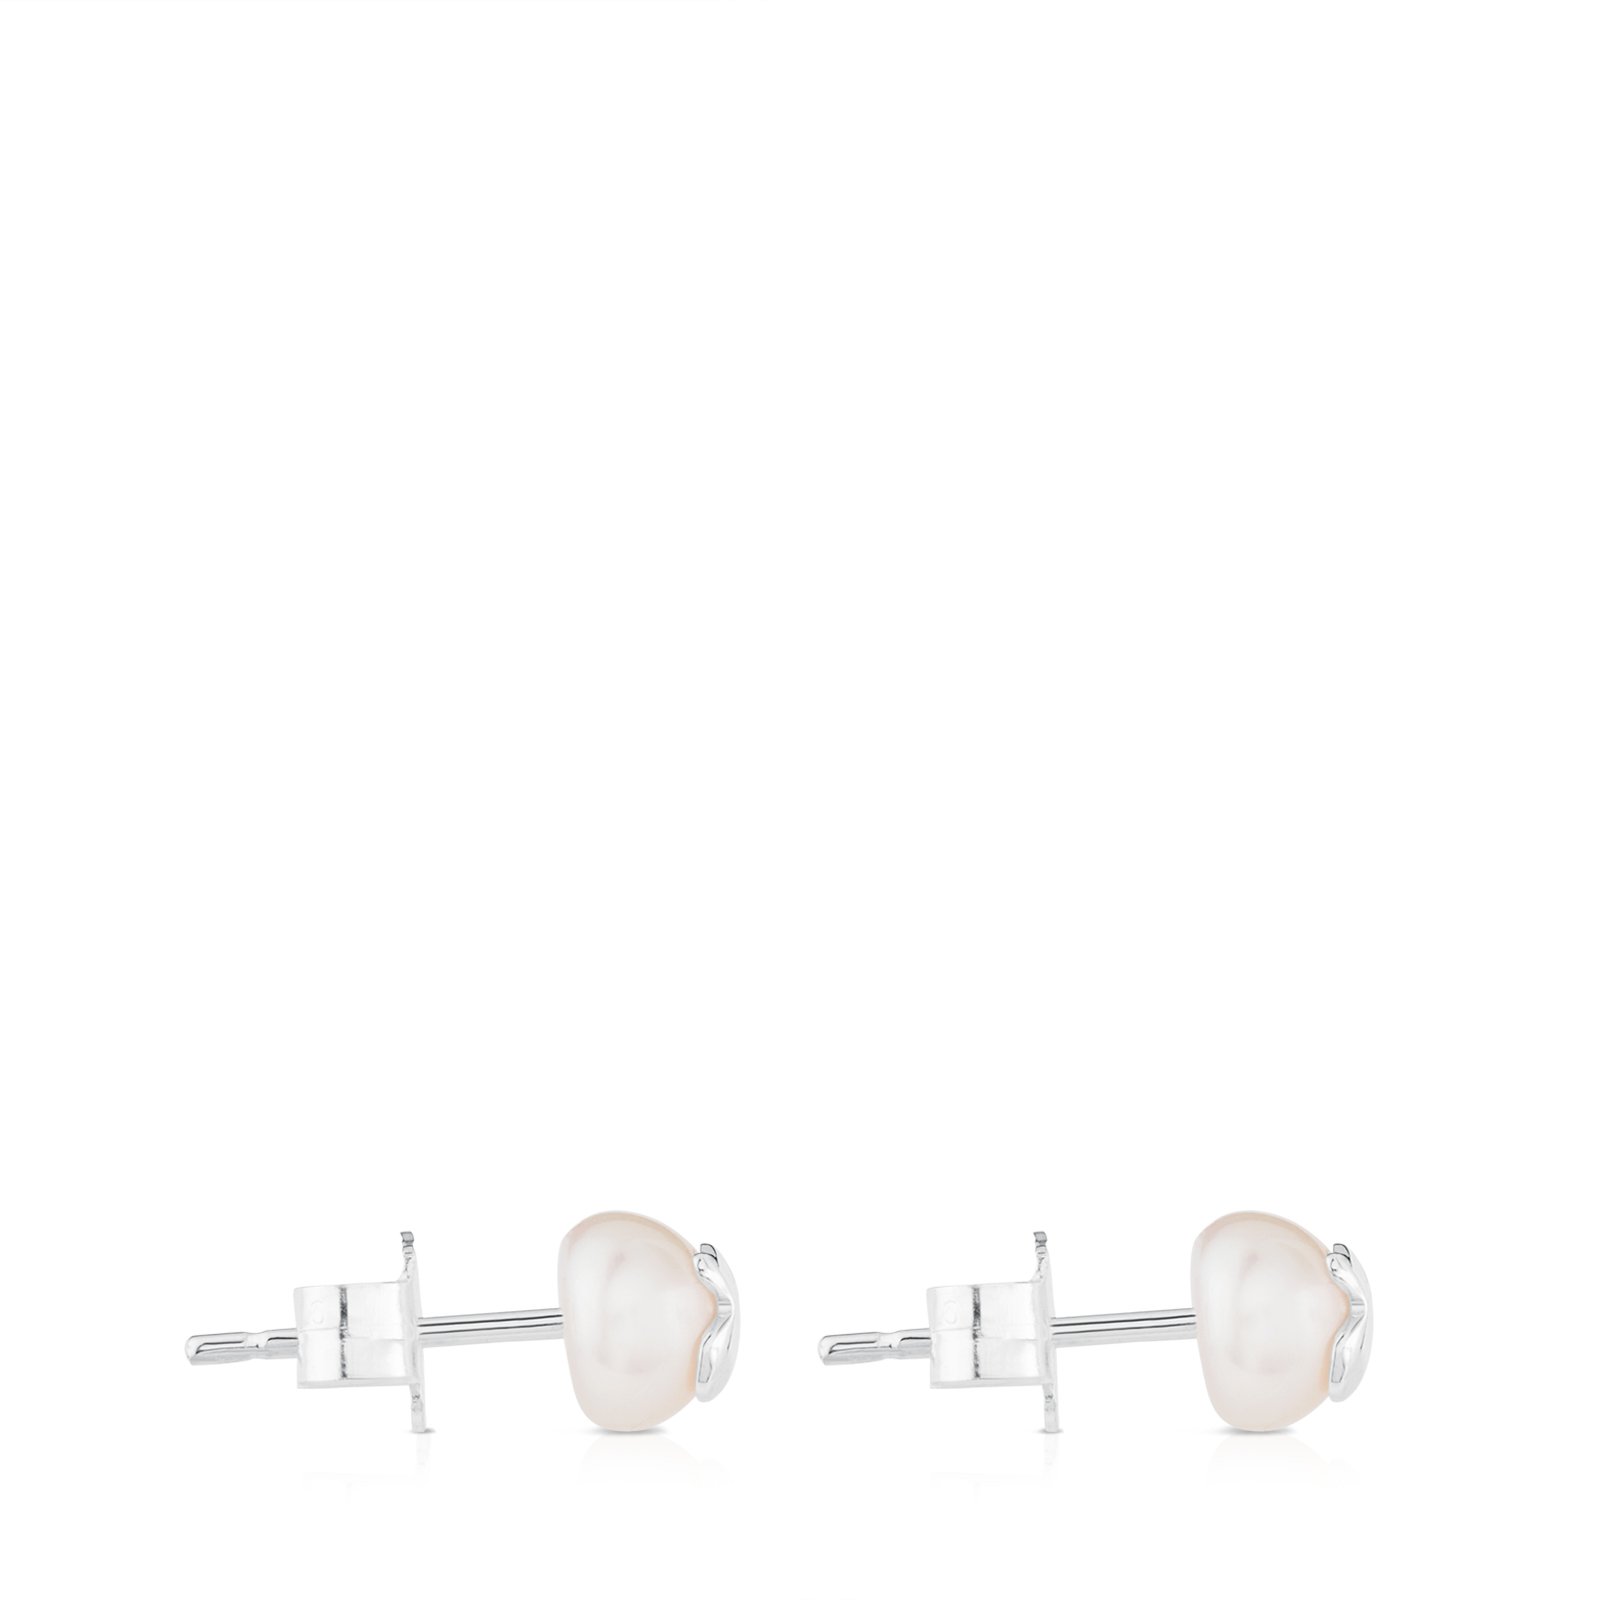 TOUS Bear 925 Silver Stud Earrings with White Freshwater Cultured Pearls